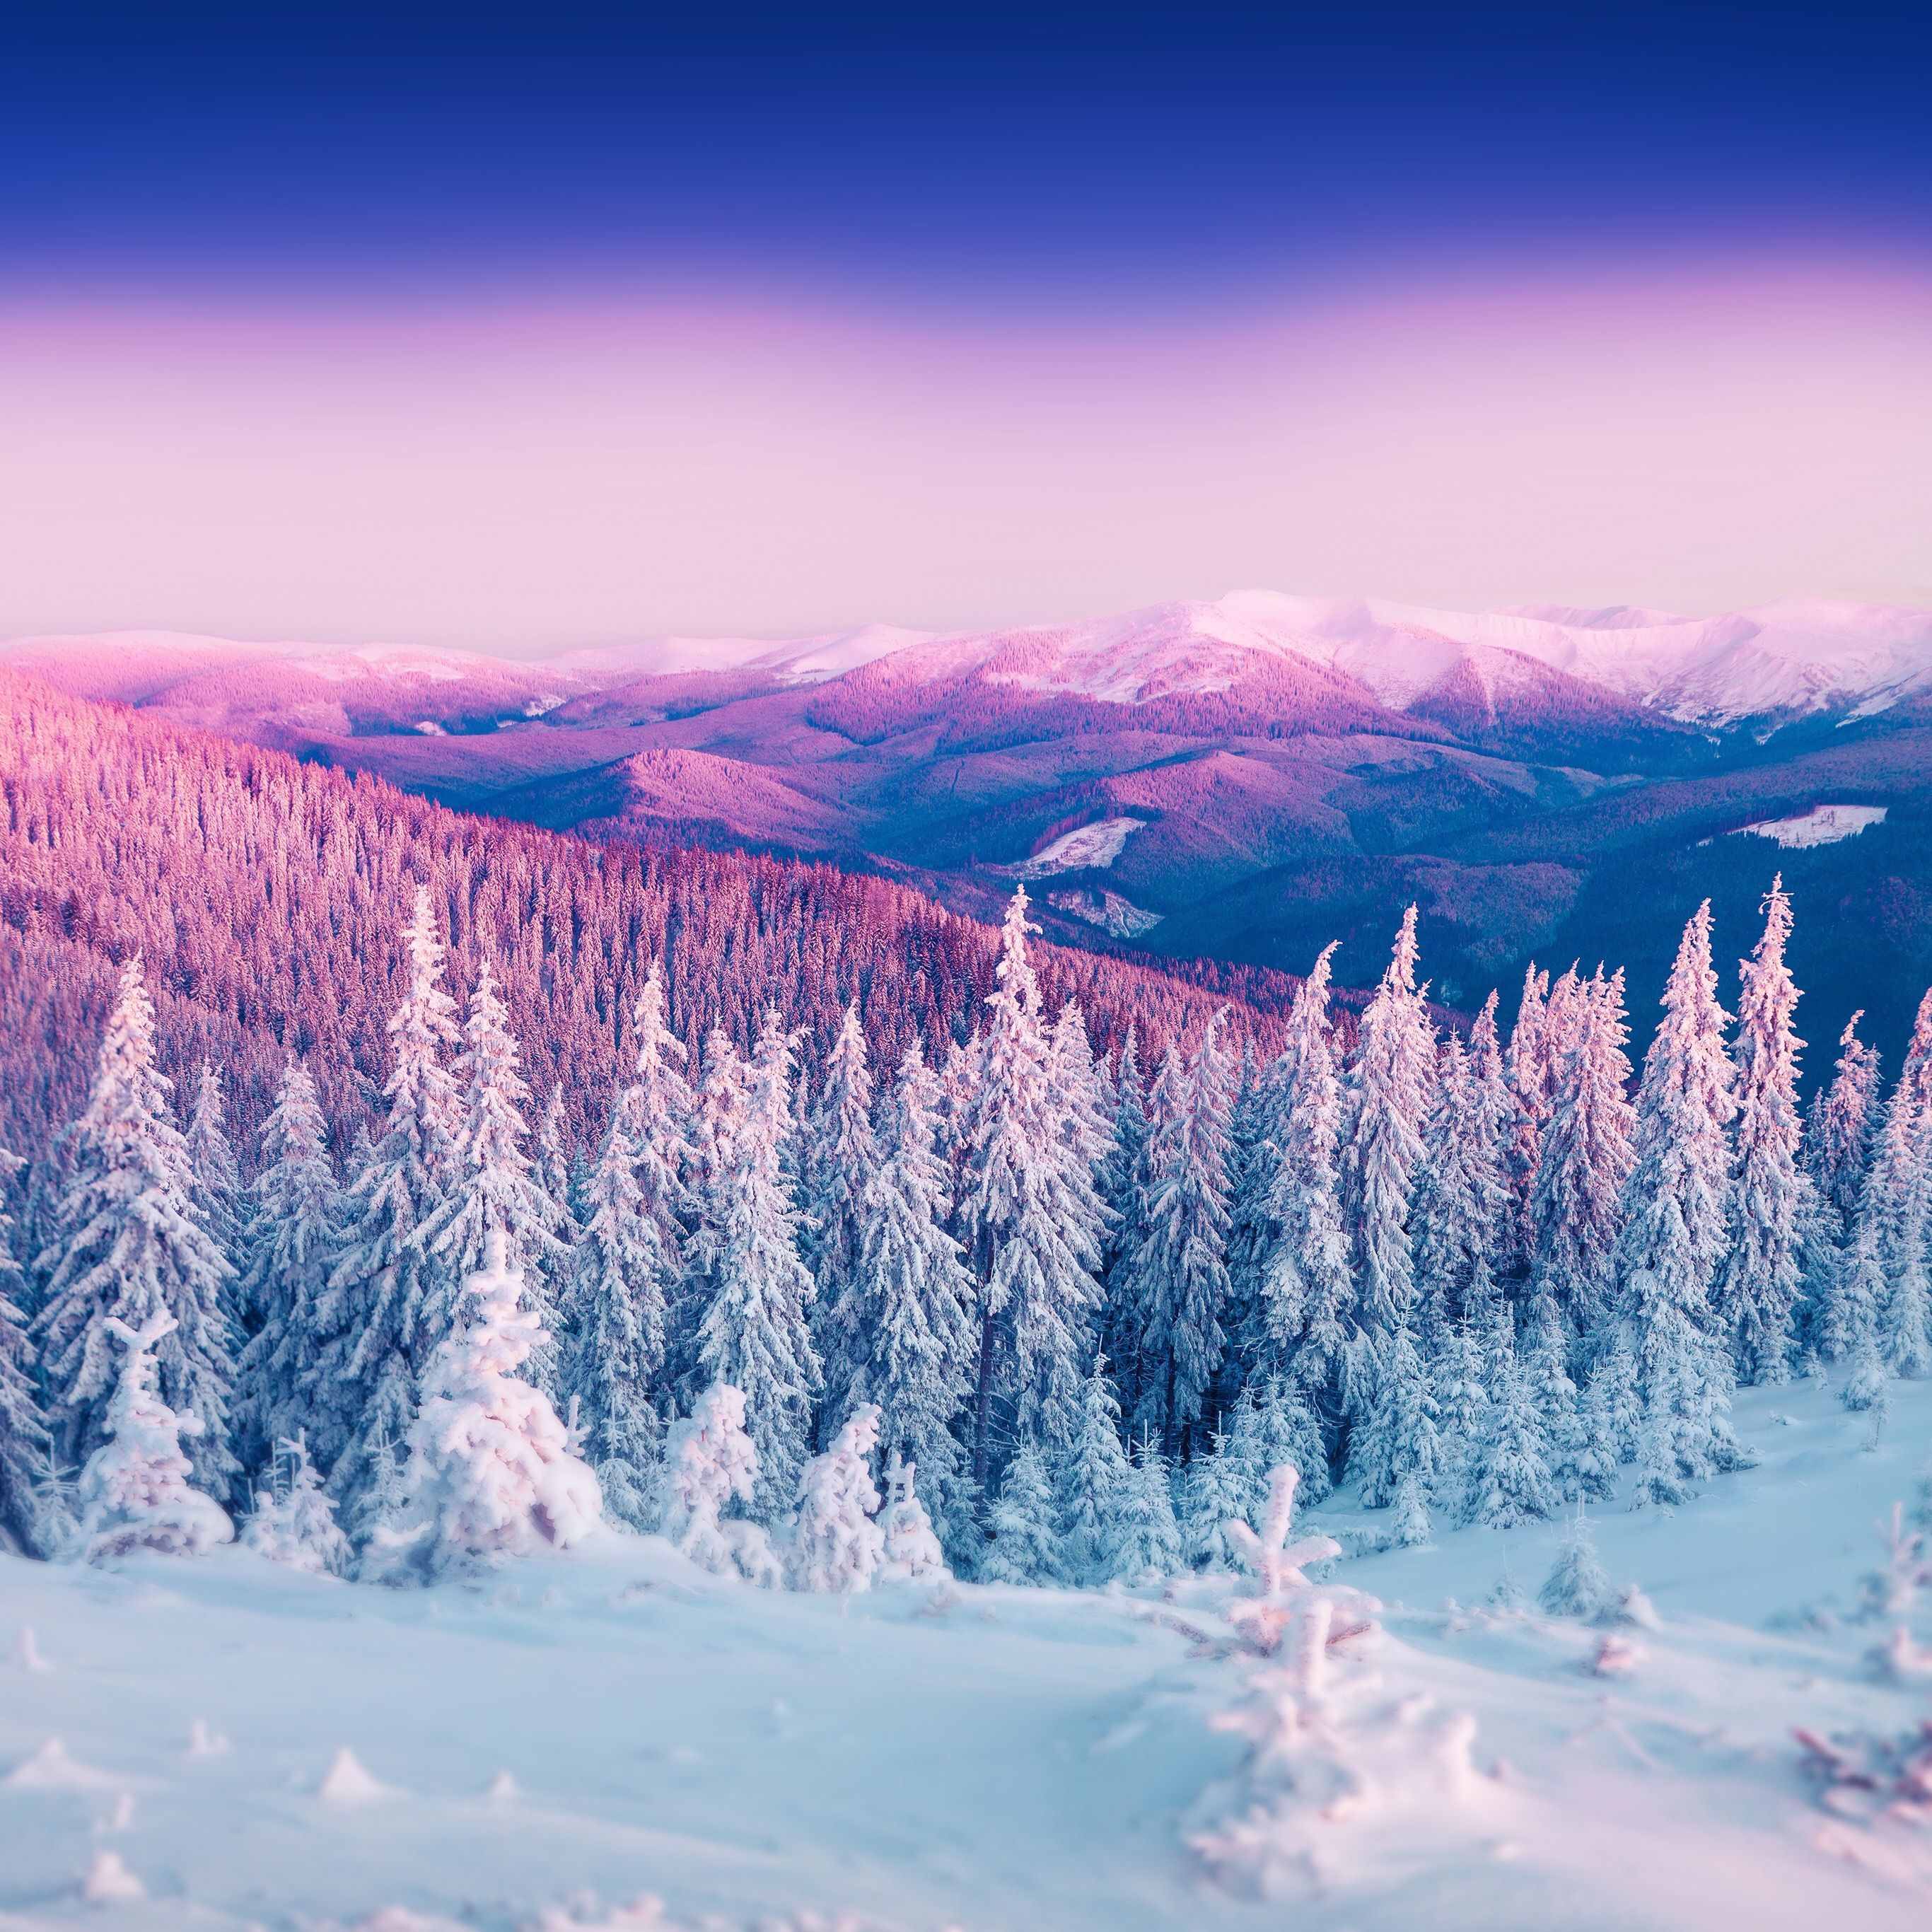 Colorful winter scene in the Carpathian mountains. First light of sunrise glowing fir trees and fr. iPhone wallpaper winter, Landscape wallpaper, Winter wallpaper